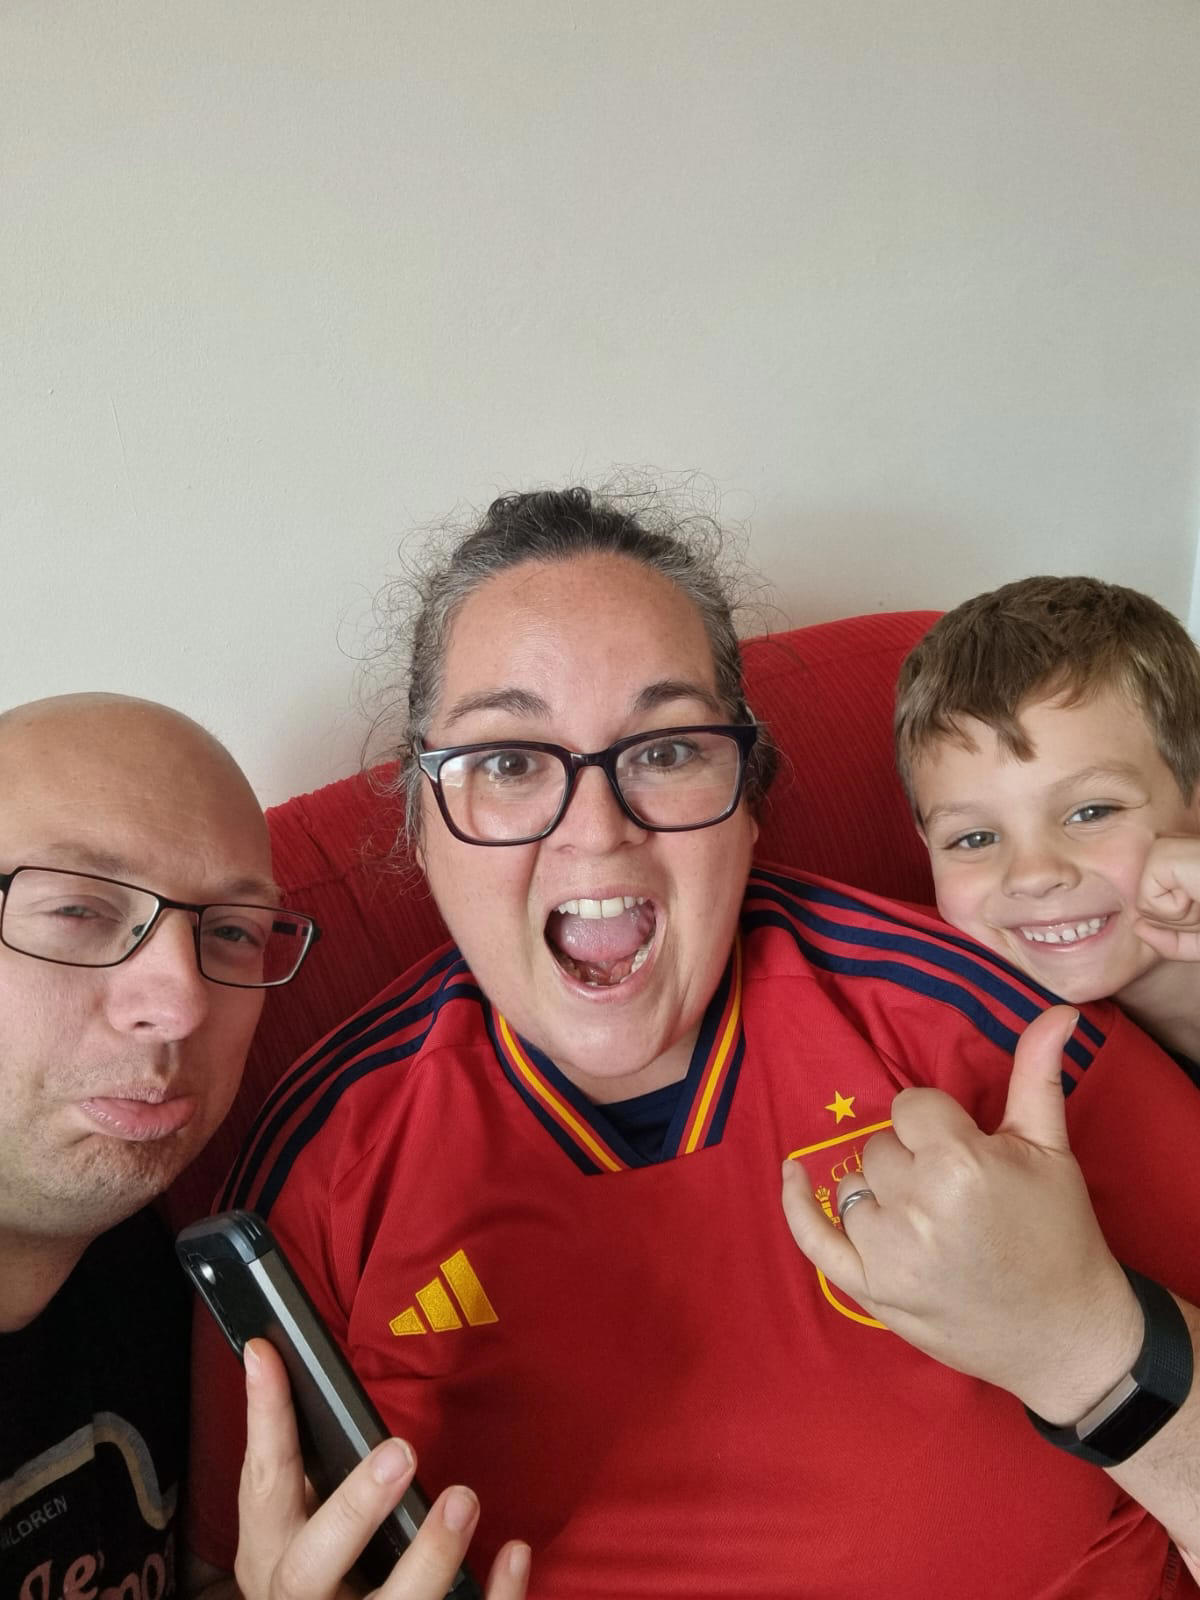 England Fan Experienced ‘very Tense’ Final Watching With His Spanish Wife